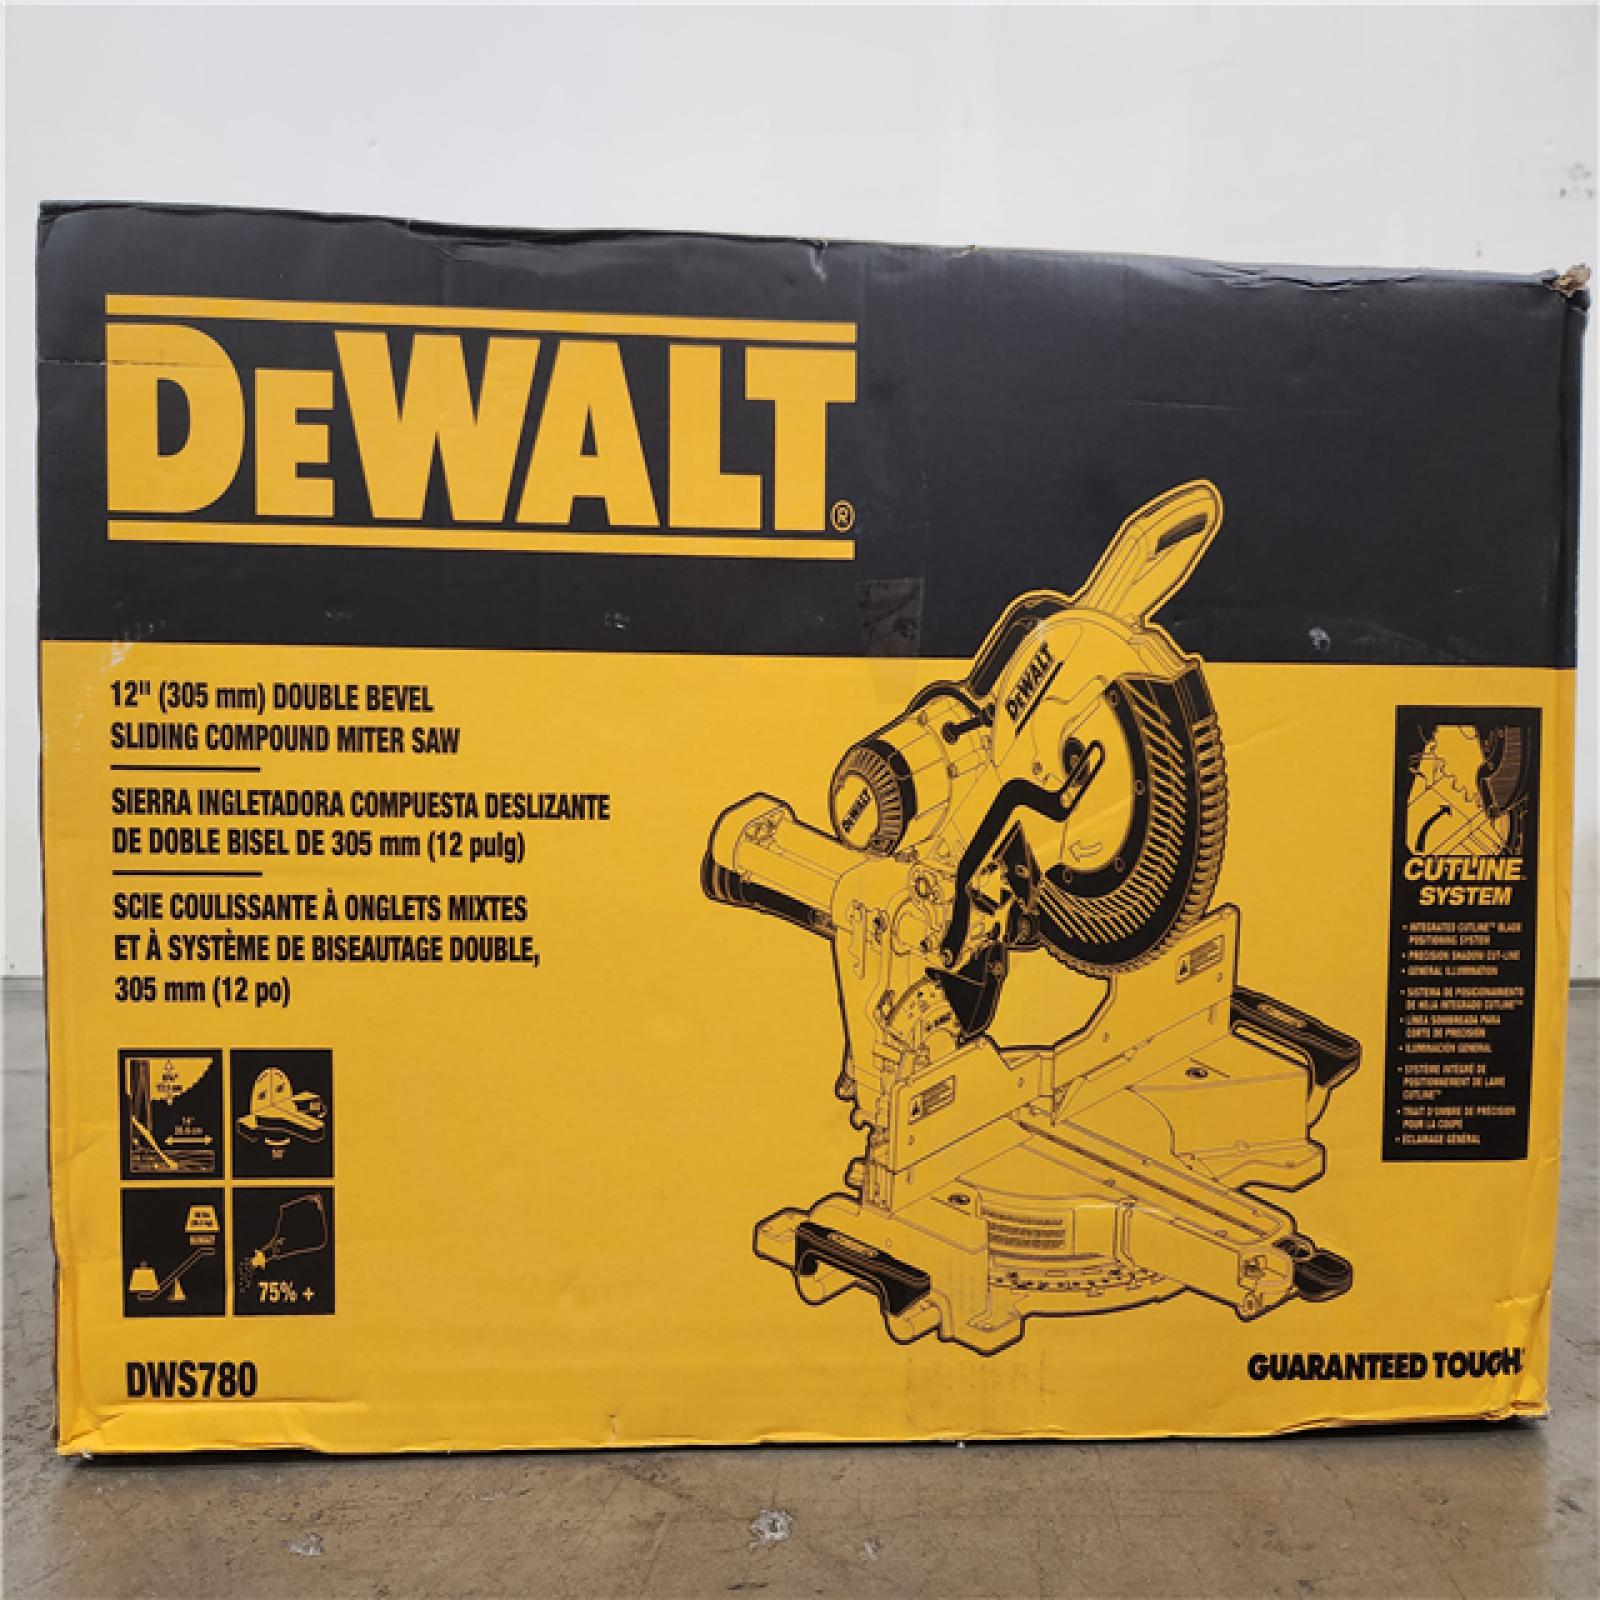 Phoenix Location NEW DEWALT 15 Amp Corded 12 in. Double Bevel Sliding Compound Miter Saw with XPS technology, Blade Wrench and Material Clamp DWS780